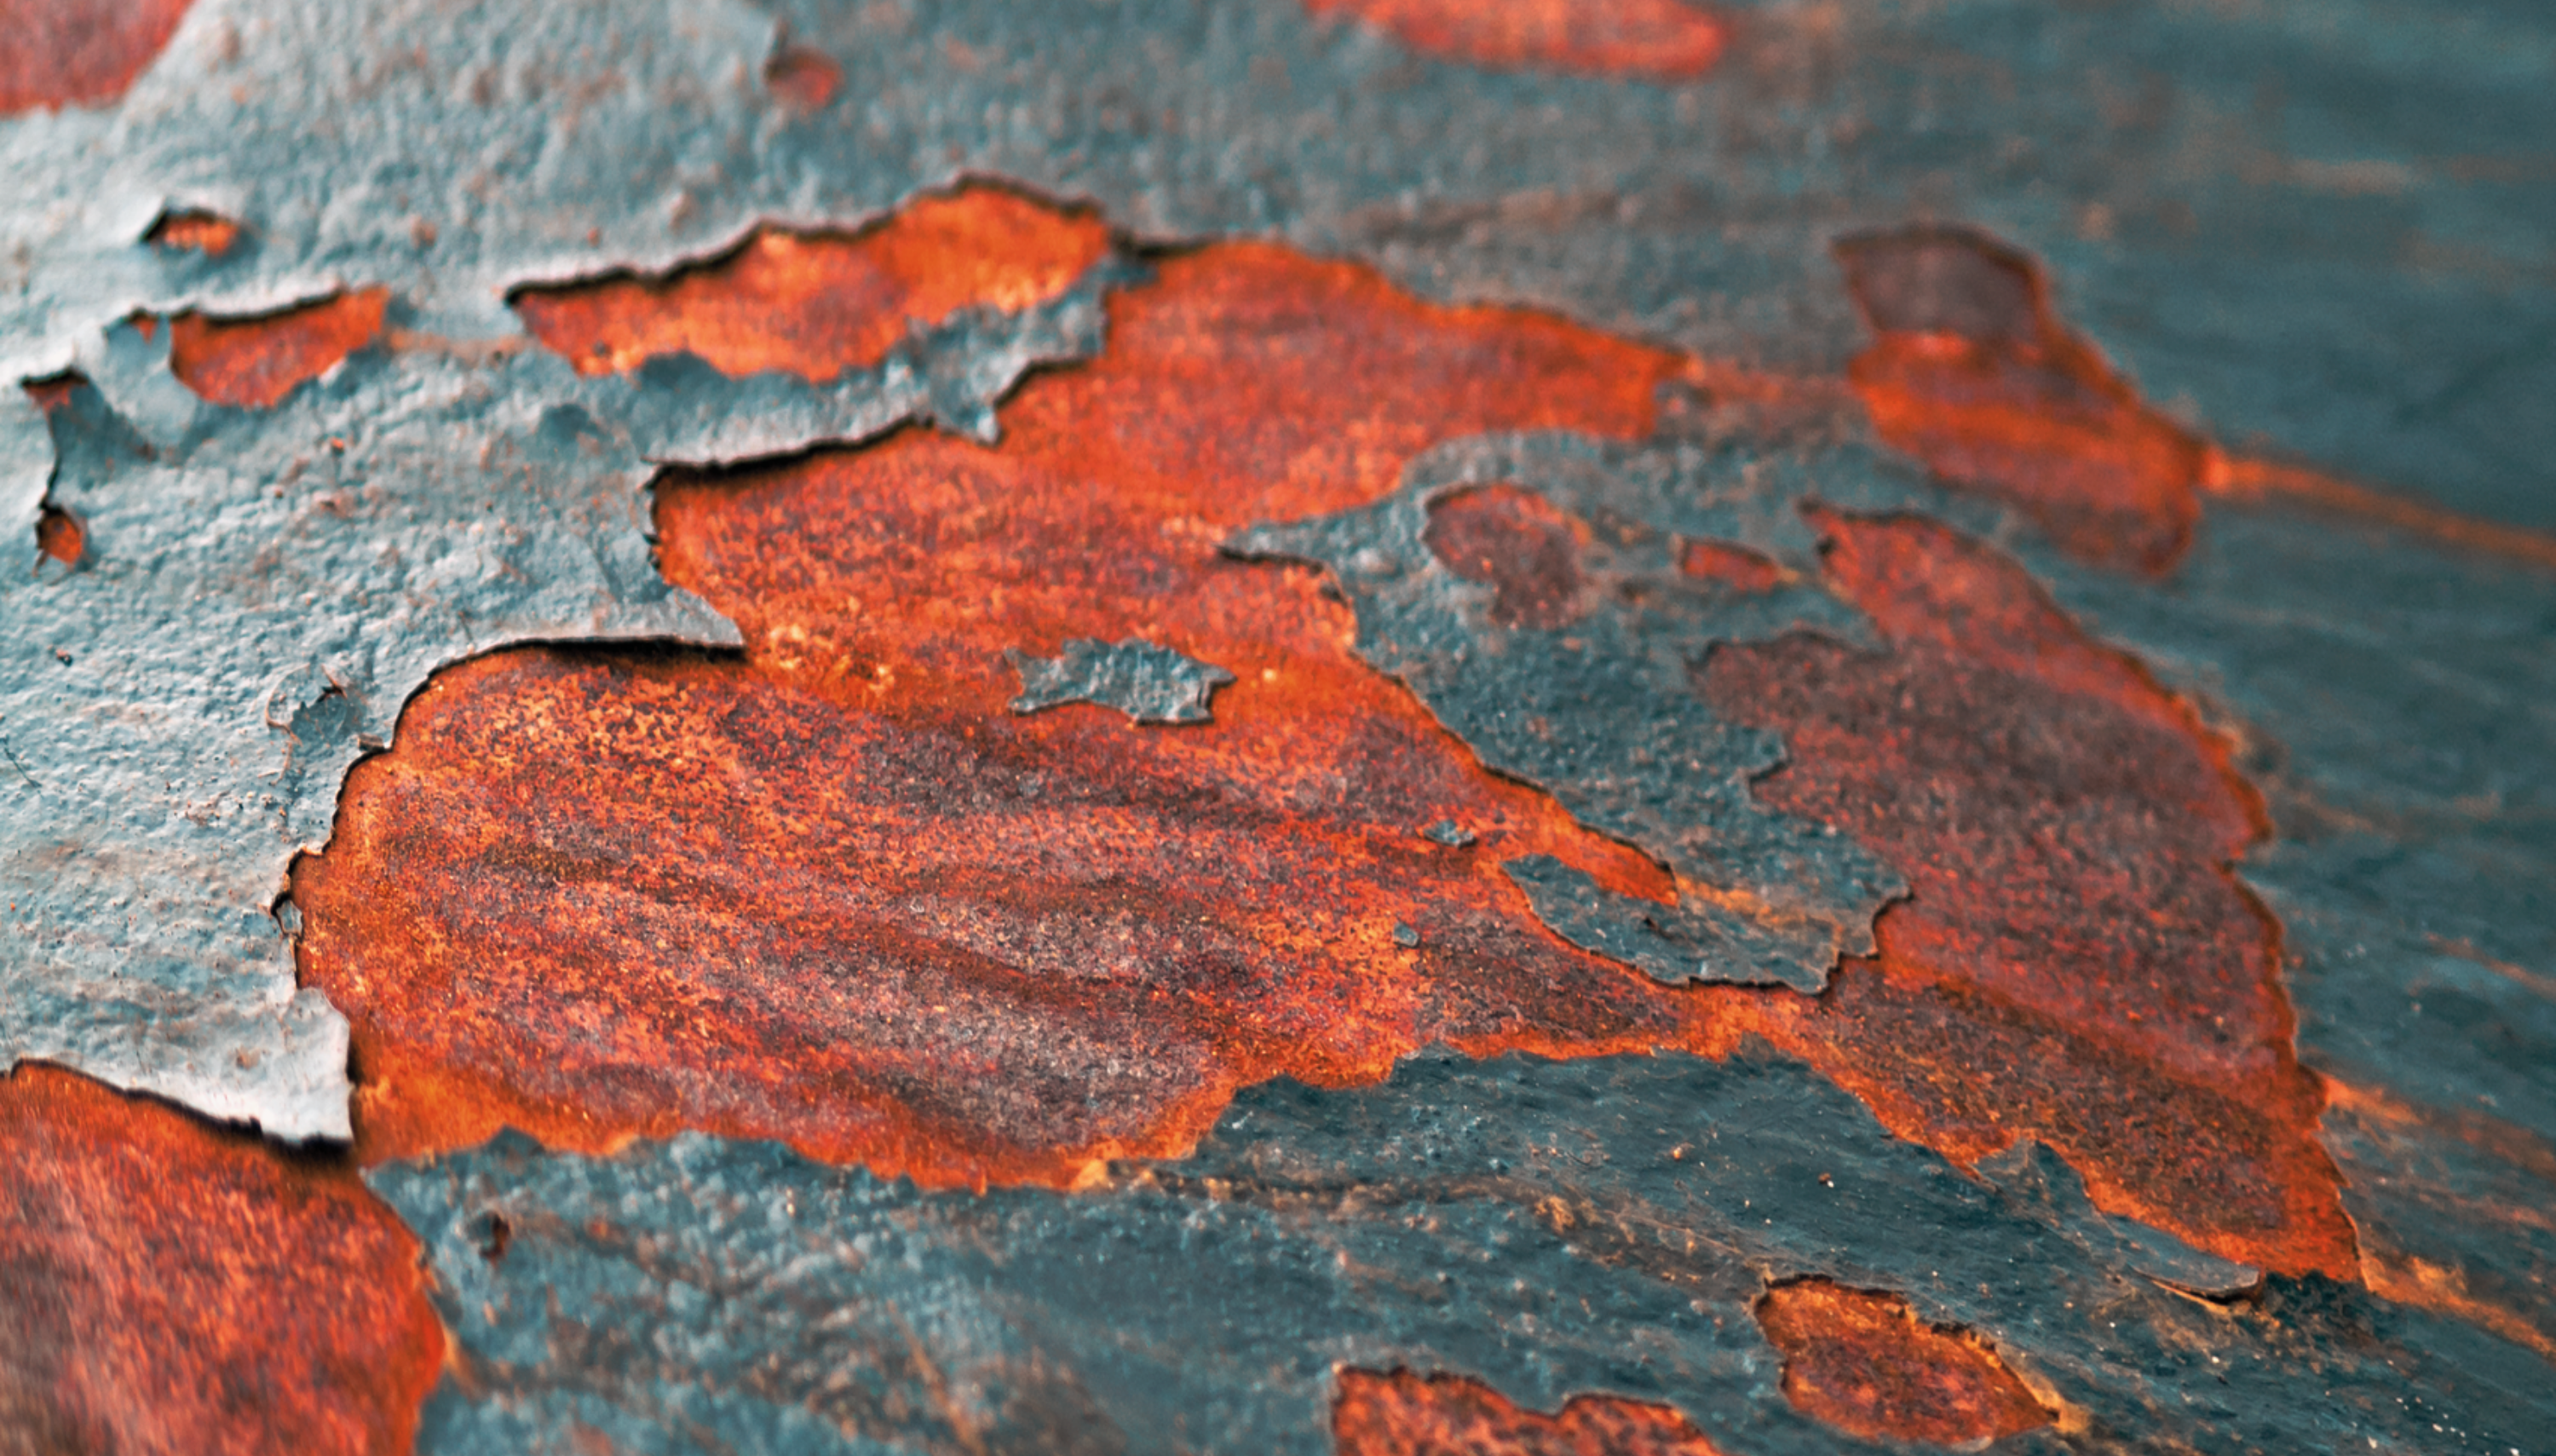 The Relationship Between Asset Value and Corrosion